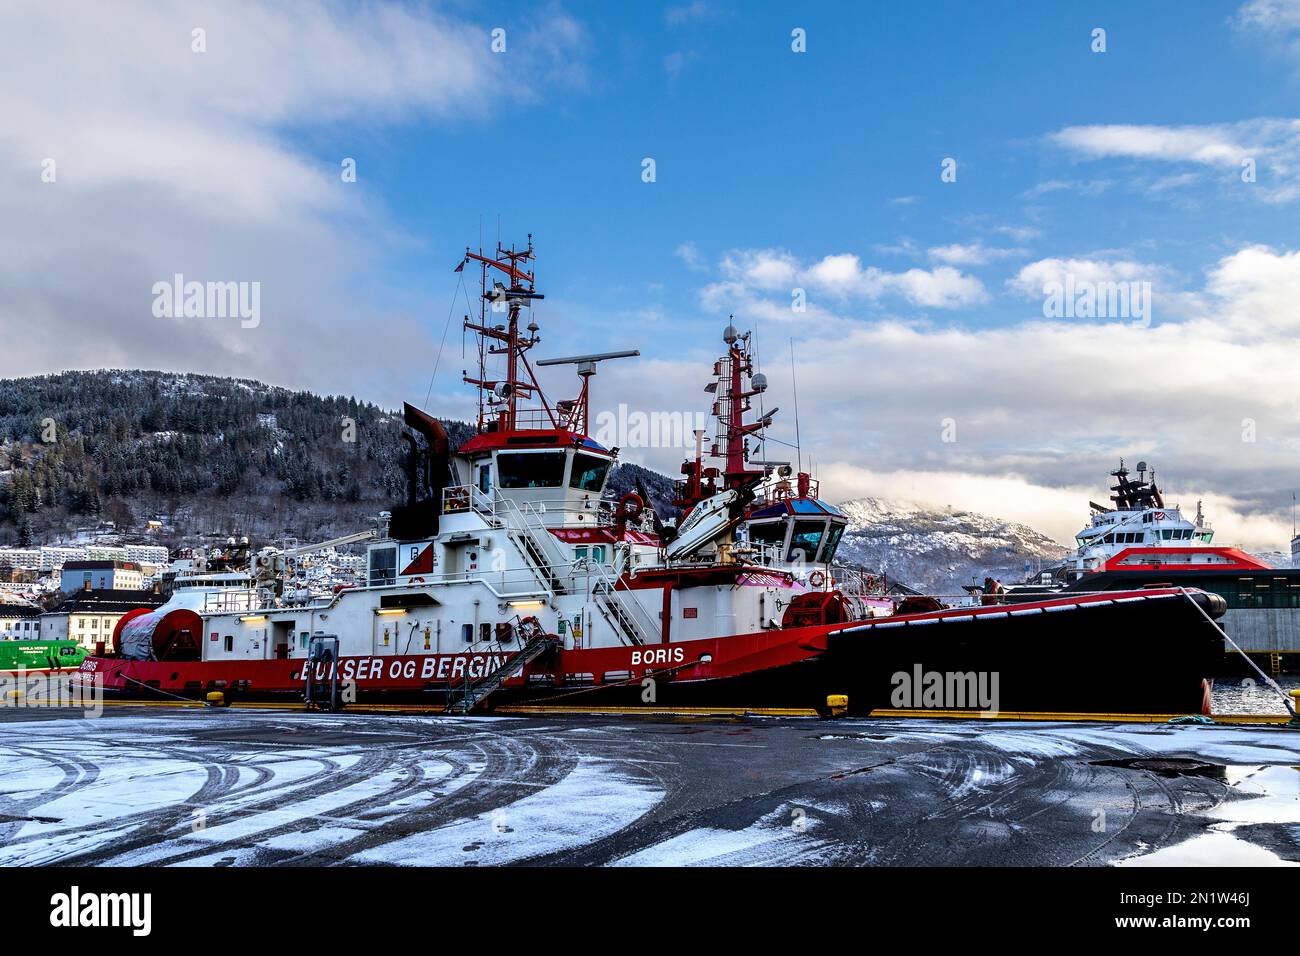 Tug boats Boris and BB Supporter alongside in the port of Bergen, Norway. Stock Photo